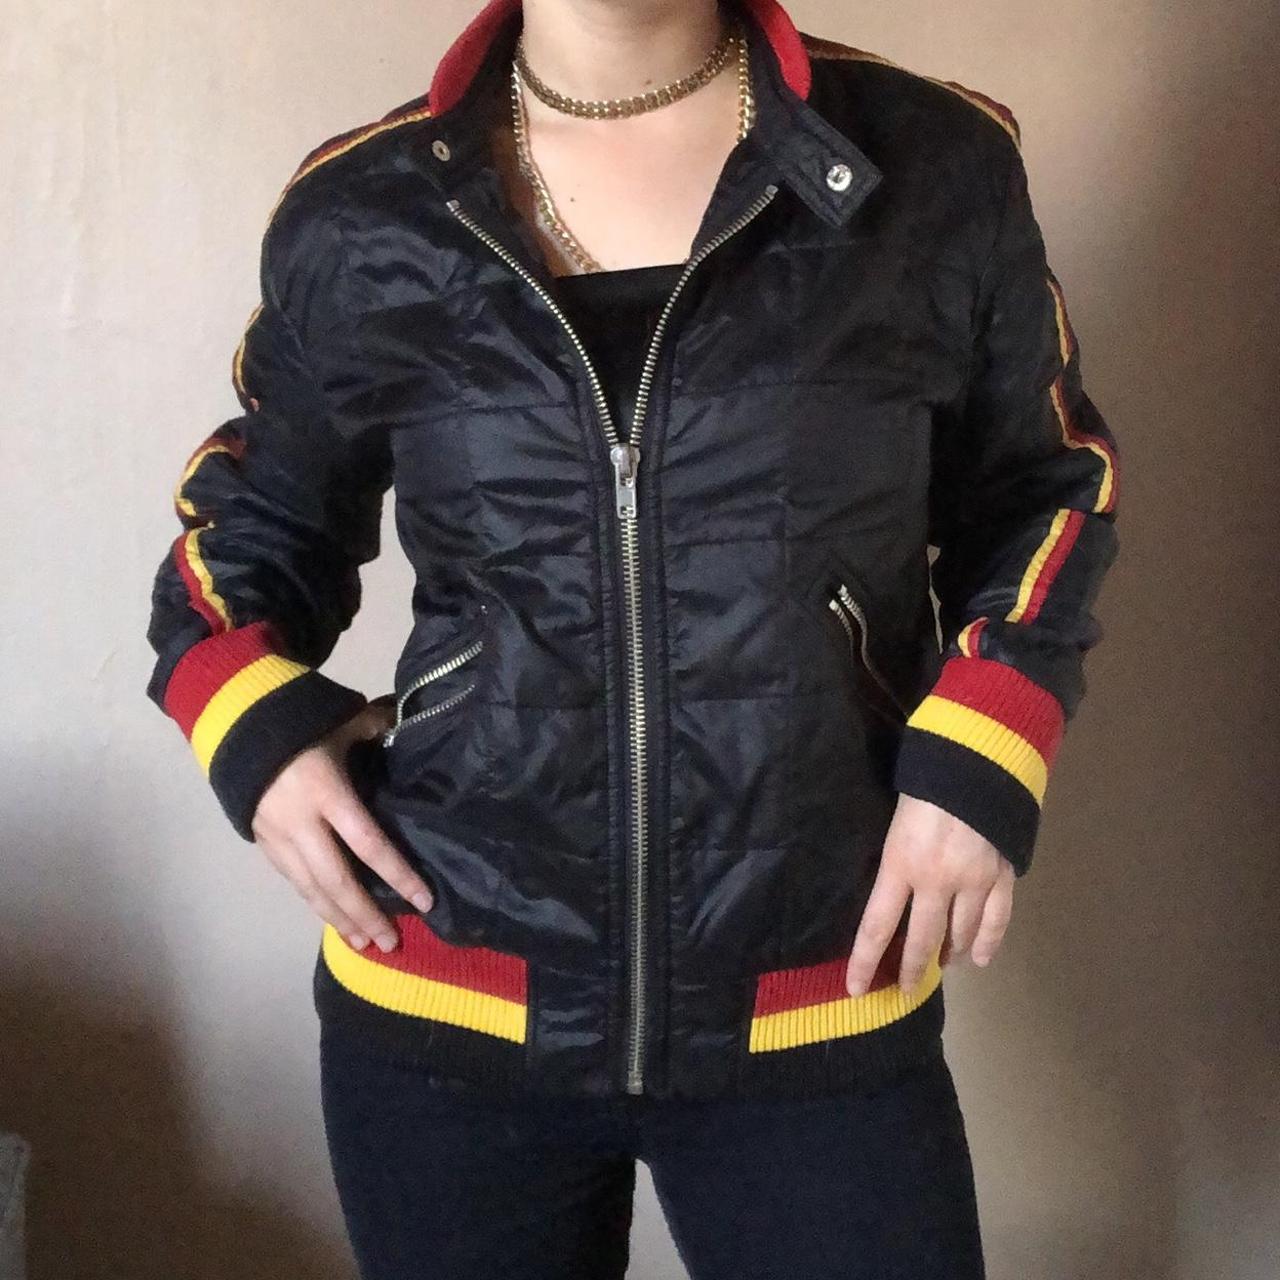 Product Image 1 - Black Bomber Jacket with Red